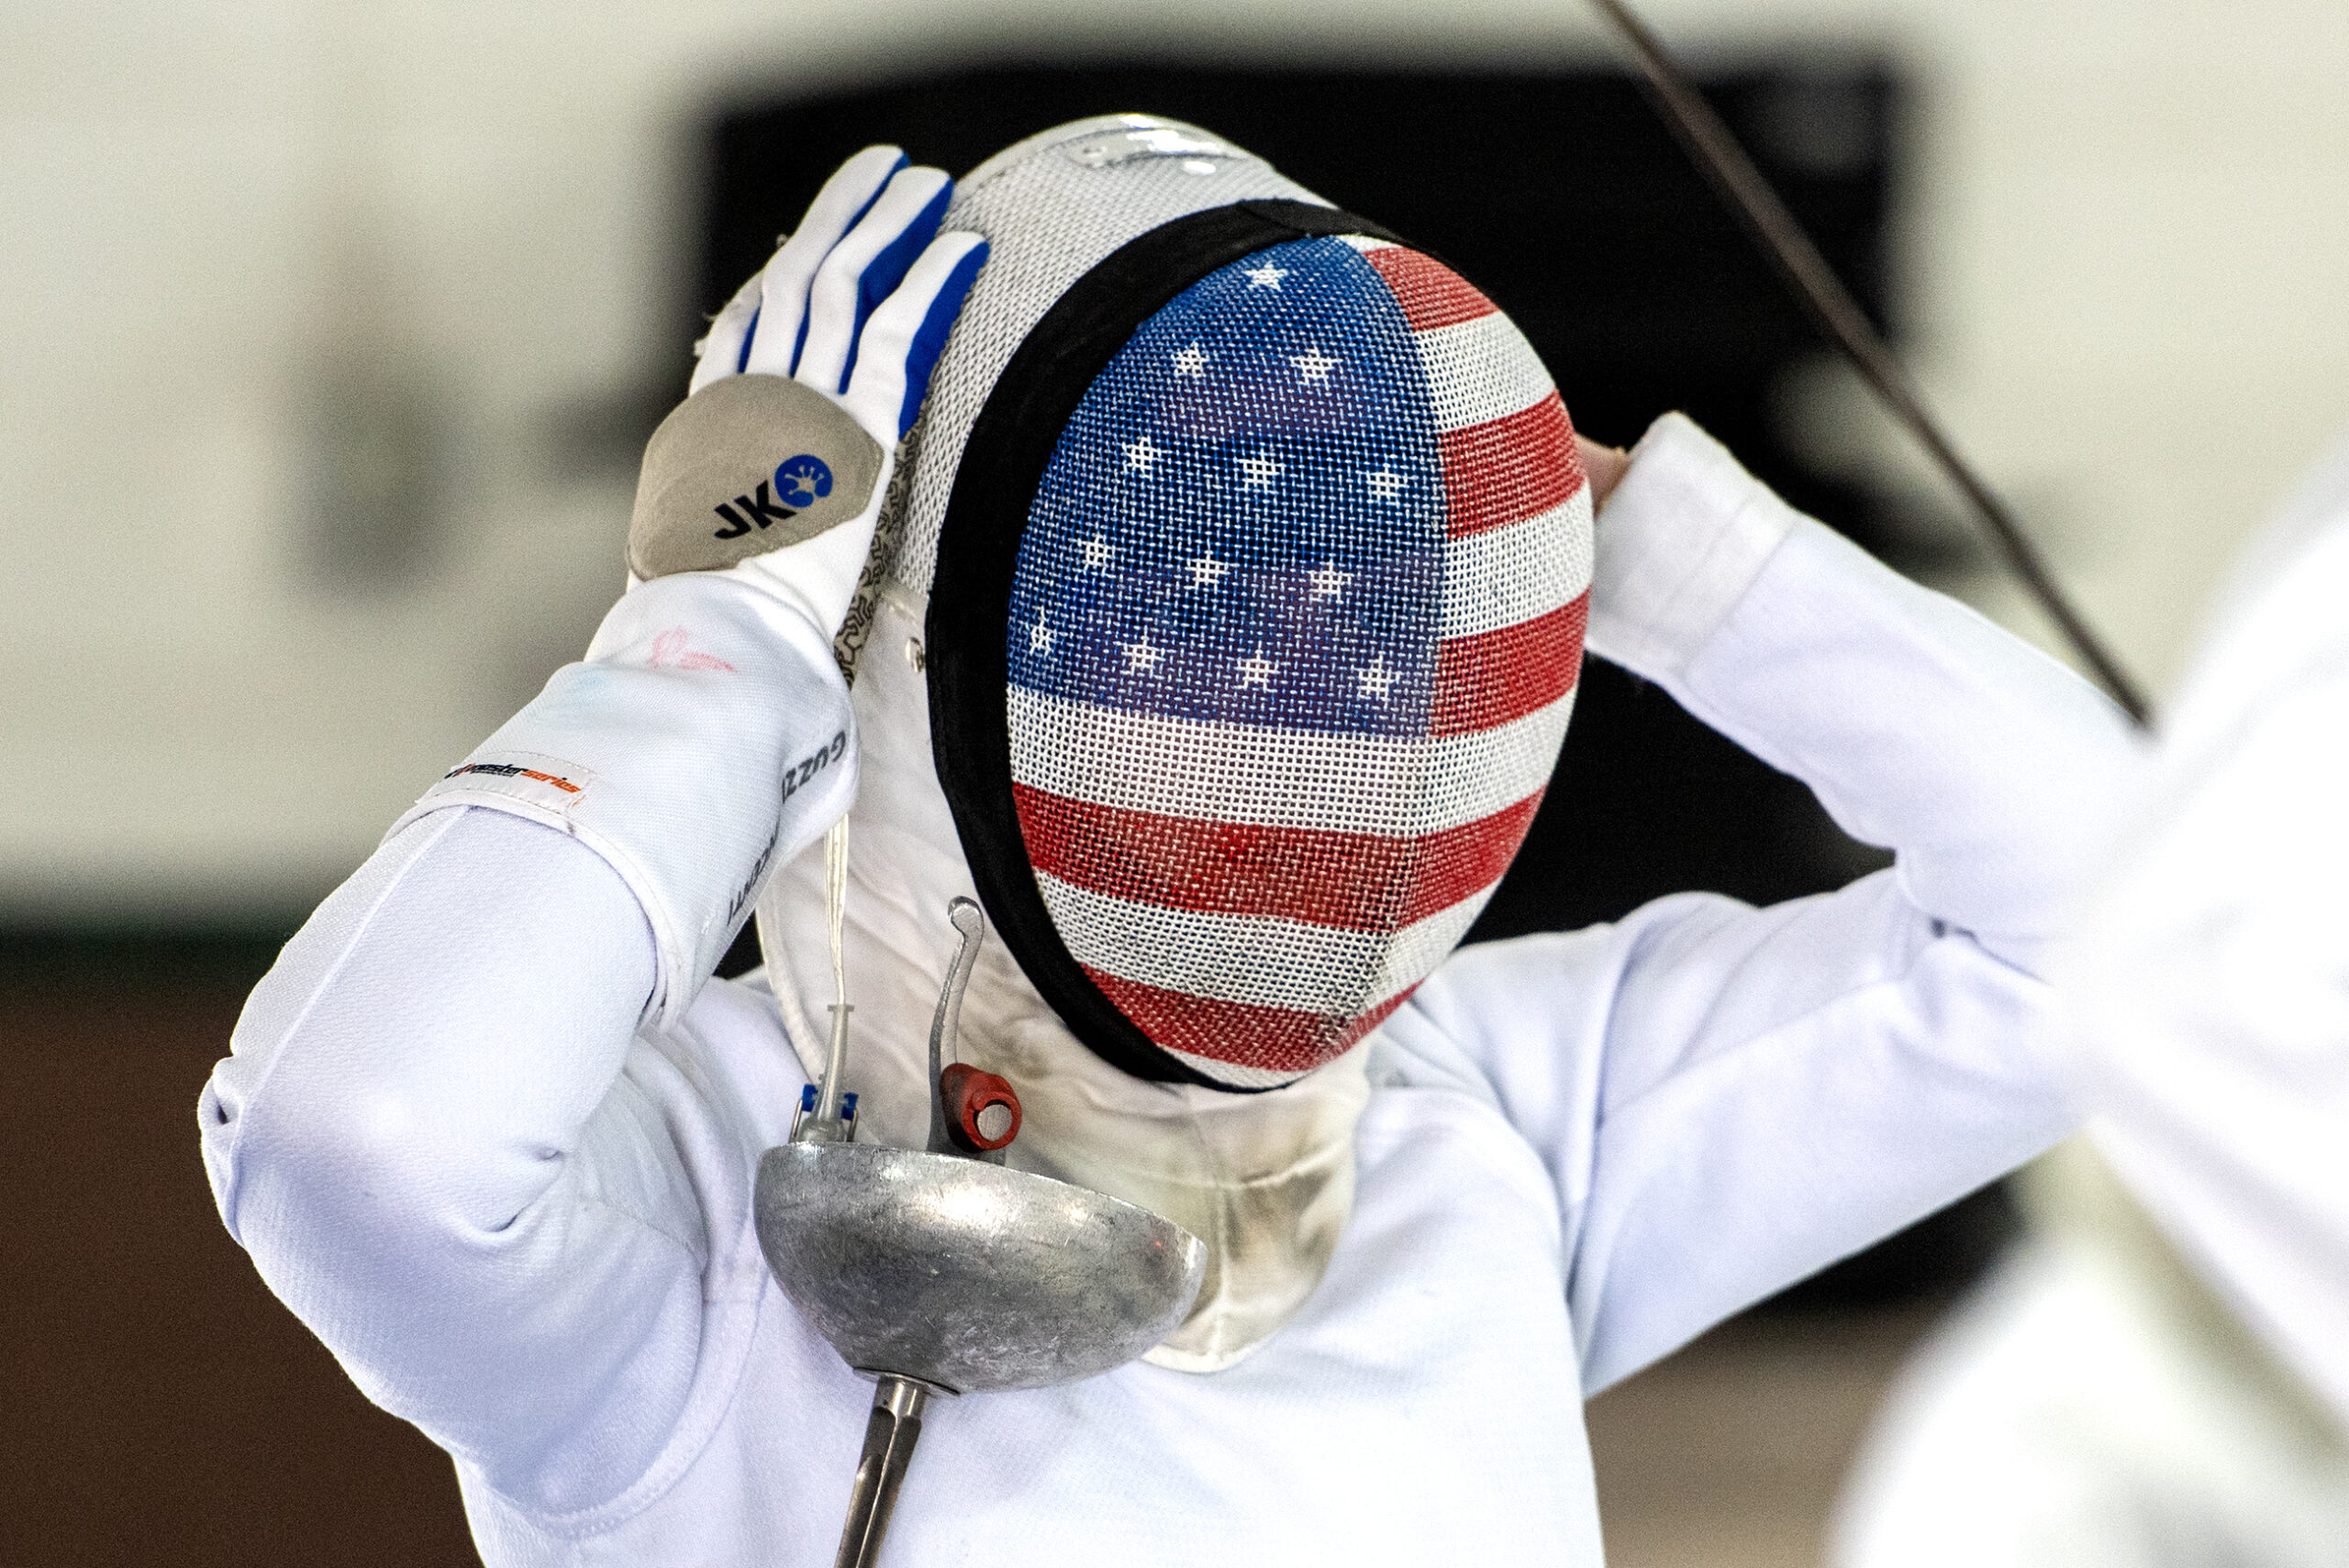 Wisconsin fencer takes a stab at winning Olympic gold